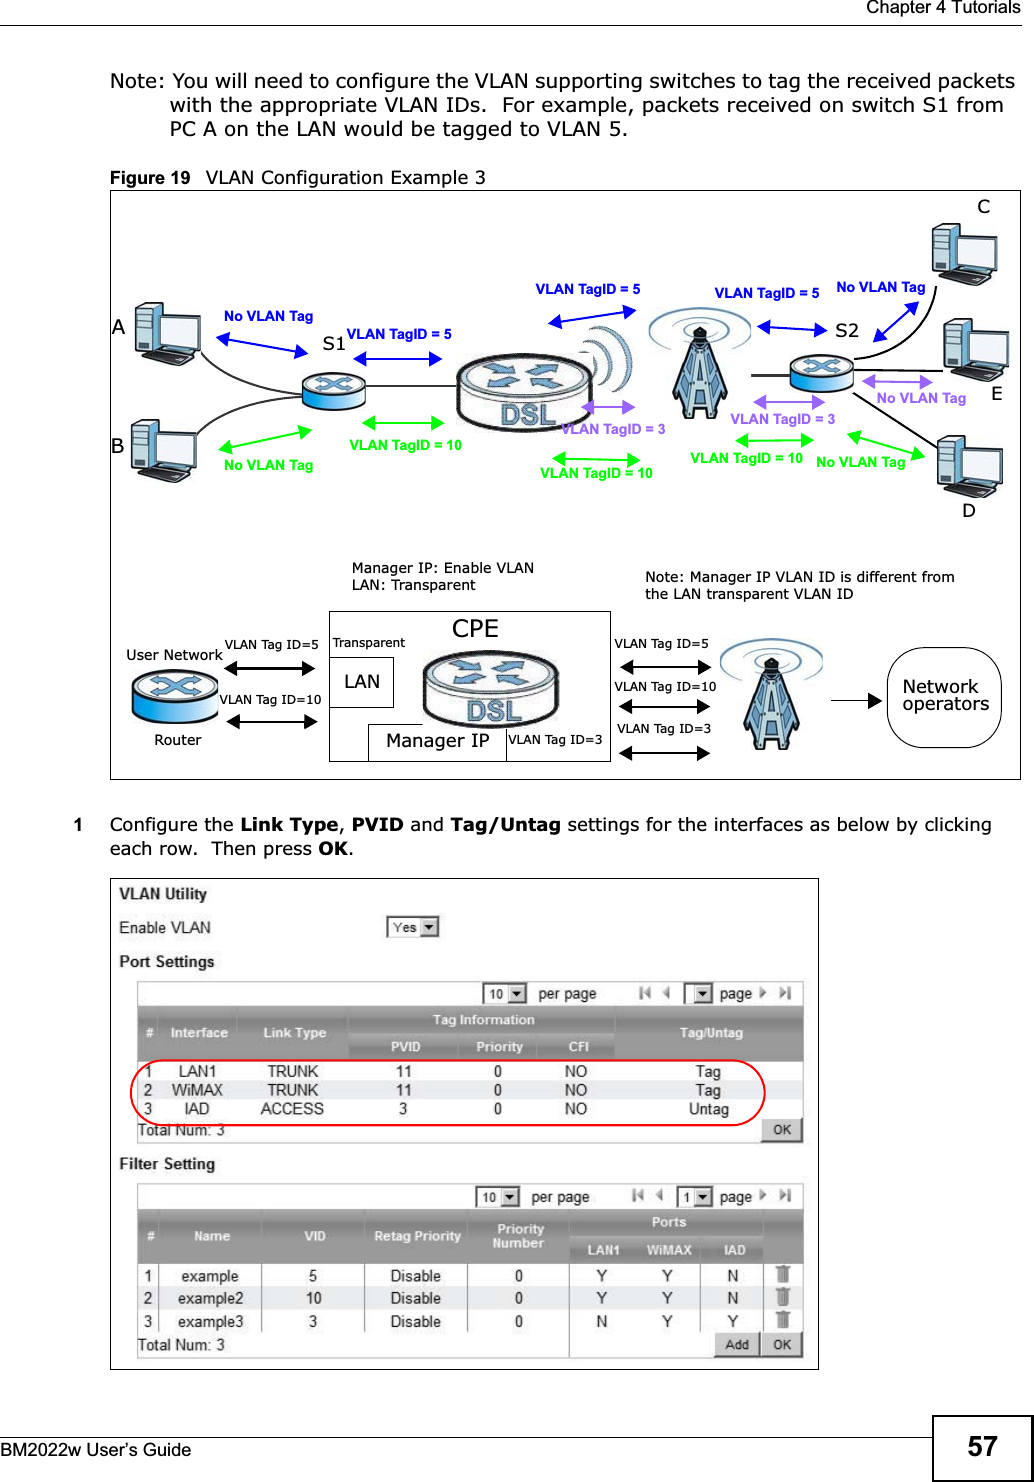  Chapter 4 TutorialsBM2022w User’s Guide 57Note: You will need to configure the VLAN supporting switches to tag the received packets with the appropriate VLAN IDs.  For example, packets received on switch S1 from PC A on the LAN would be tagged to VLAN 5.  Figure 19   VLAN Configuration Example 31Configure the Link Type,PVID and Tag/Untag settings for the interfaces as below by clicking each row.  Then press OK.VLAN TagID = 5VLAN TagID = 10ABNo VLAN TagNo VLAN TagVLAN TagID = 5VLAN TagID = 5VLAN TagID = 10VLAN TagID = 10 No VLAN TagNo VLAN TagCDNo VLAN TagEVLAN TagID = 3VLAN TagID = 3S1 S2CPELANManager IPUser NetworkRouterManager IP: Enable VLAN LAN: TransparentNetworkoperatorsTransparentNote: Manager IP VLAN ID is different fromVLAN Tag ID=5VLAN Tag ID=5VLAN Tag ID=10VLAN Tag ID=10VLAN Tag ID=3 VLAN Tag ID=3the LAN transparent VLAN ID 